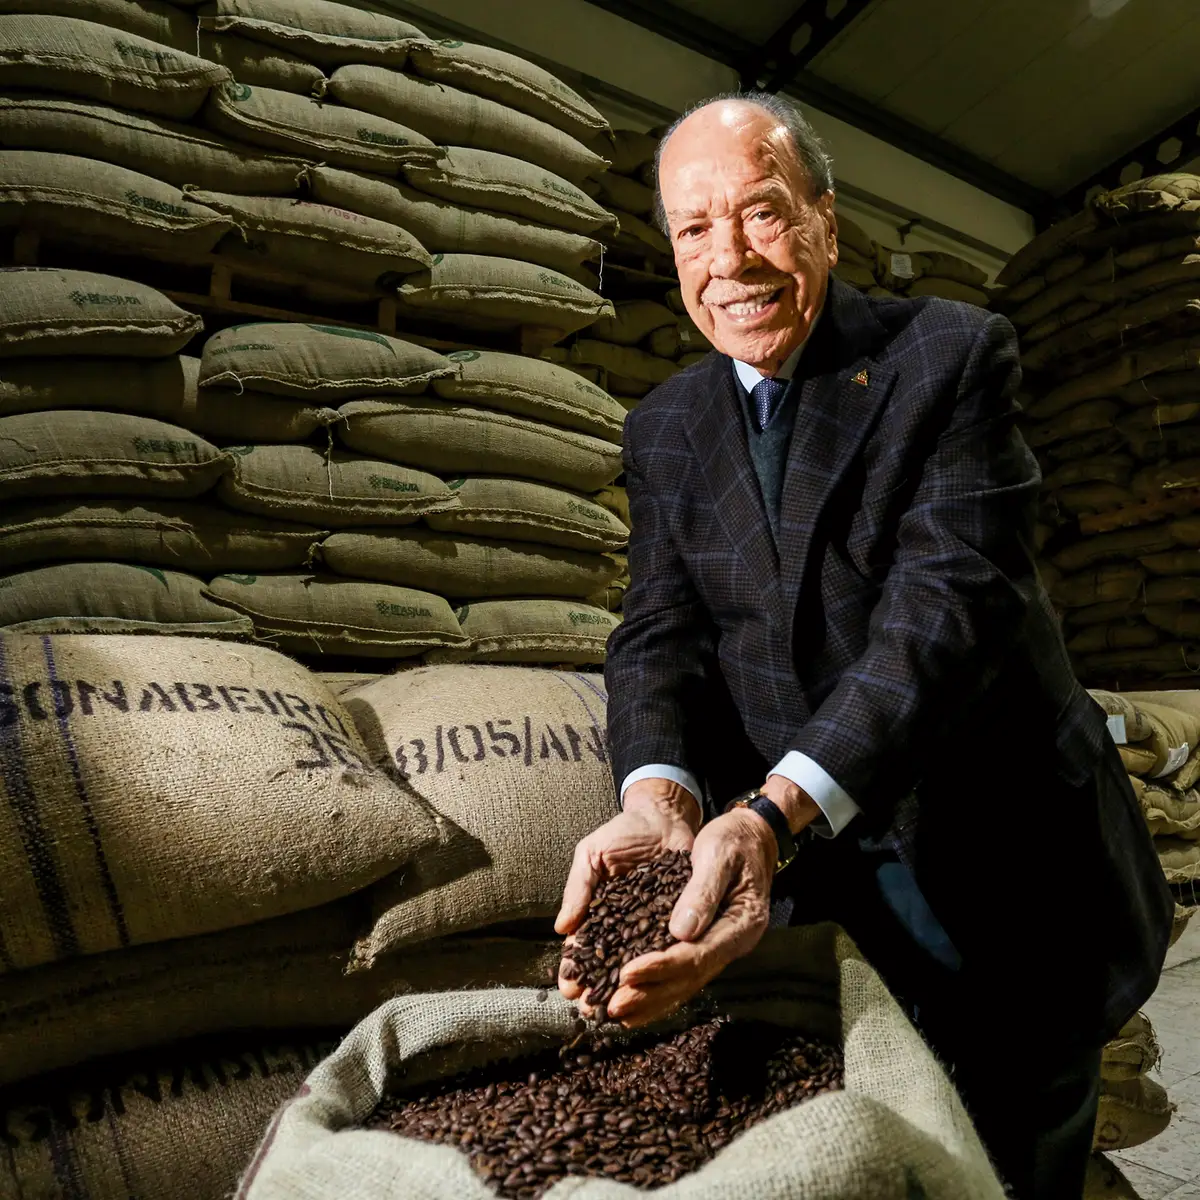 Portugal's Delta Cafes founder Rui Nabeiro dies at 91